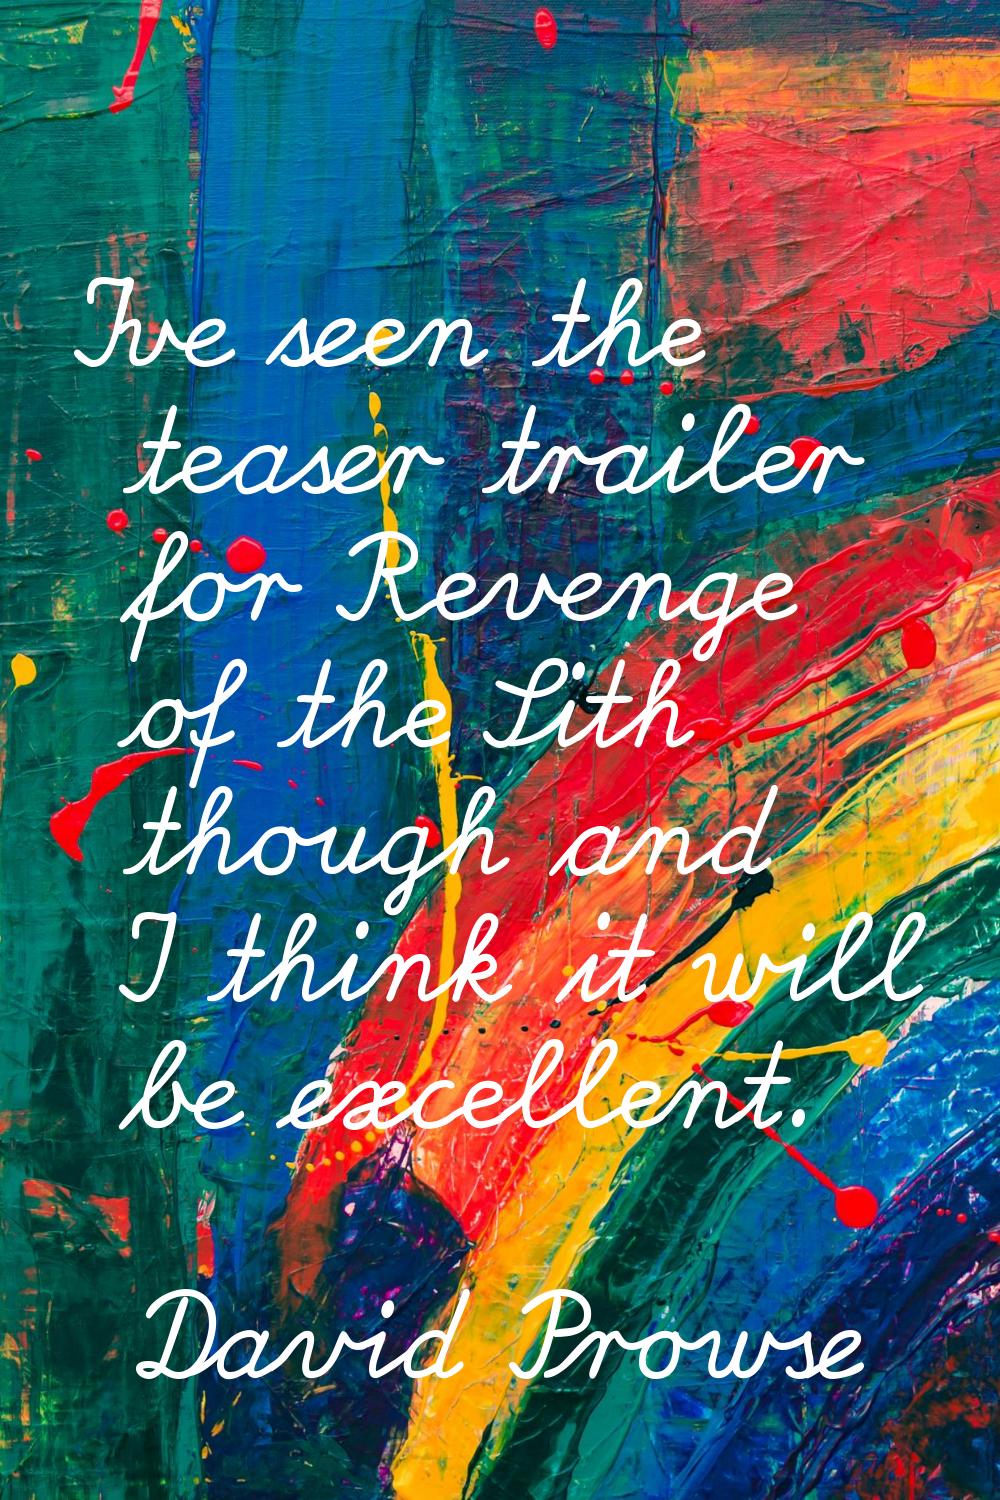 I've seen the teaser trailer for Revenge of the Sith though and I think it will be excellent.